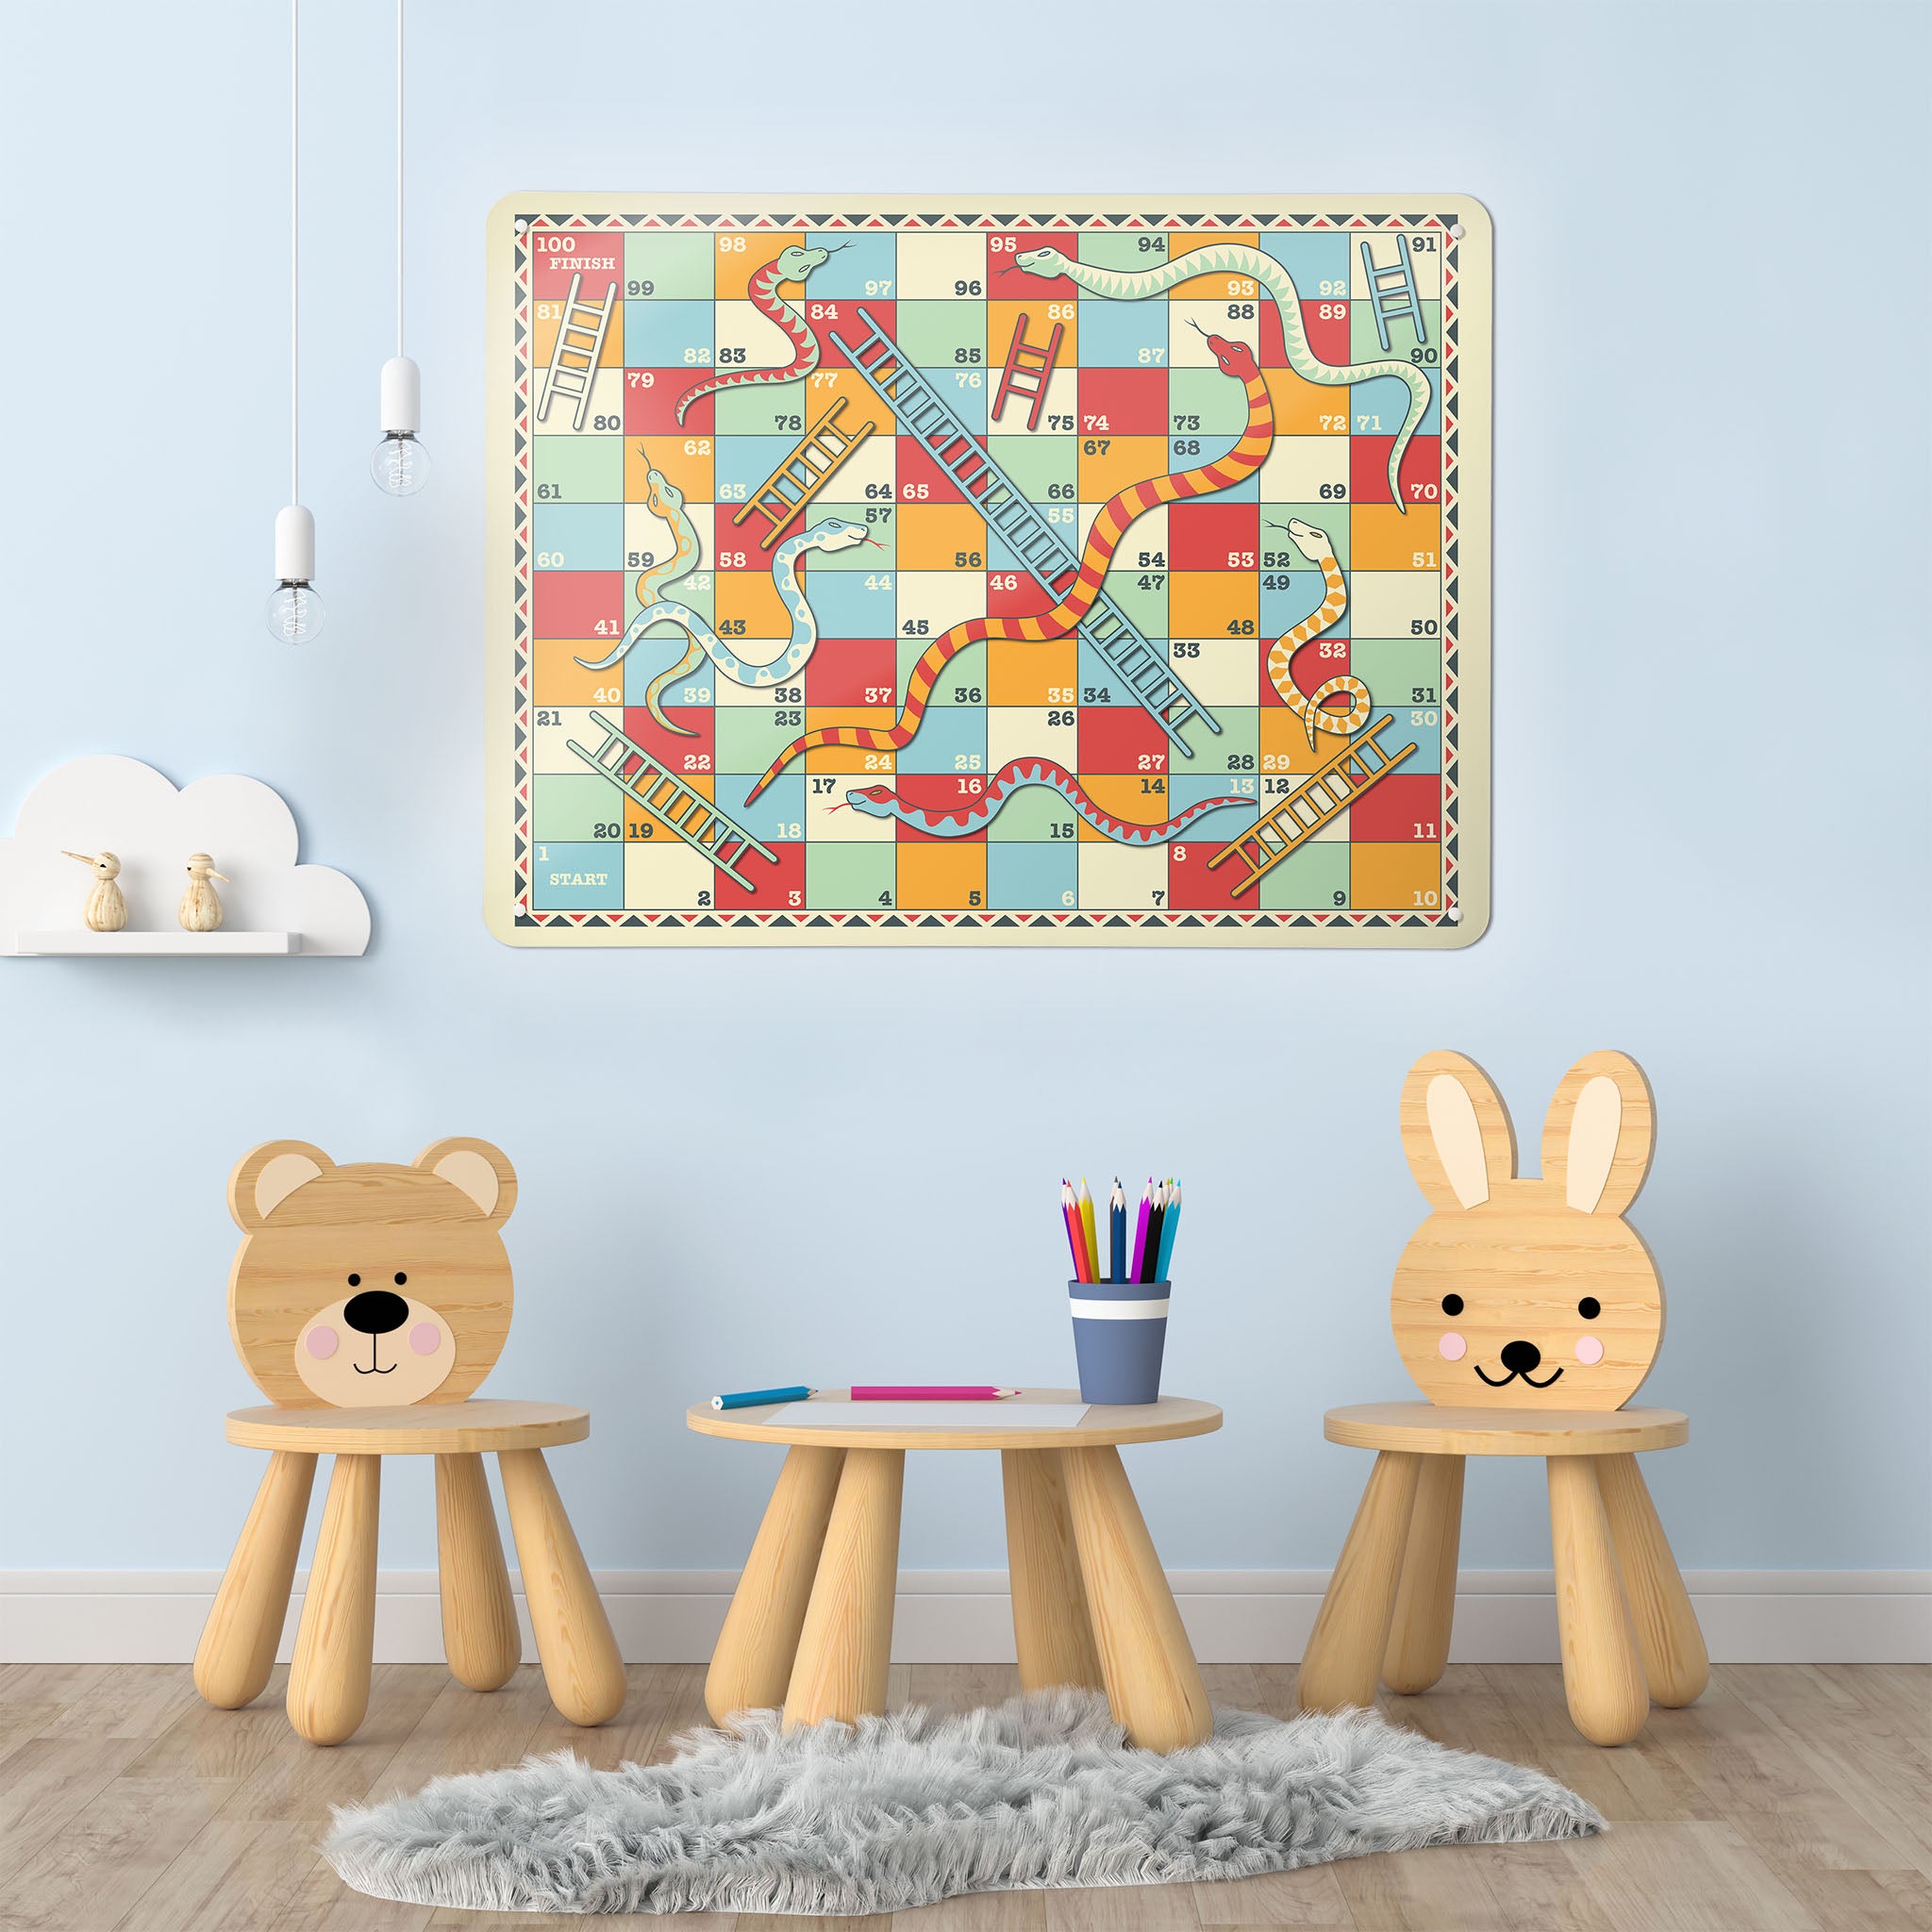 A playroom interior with a magnetic metal wall art panel showing a retro snakes and ladders game design 